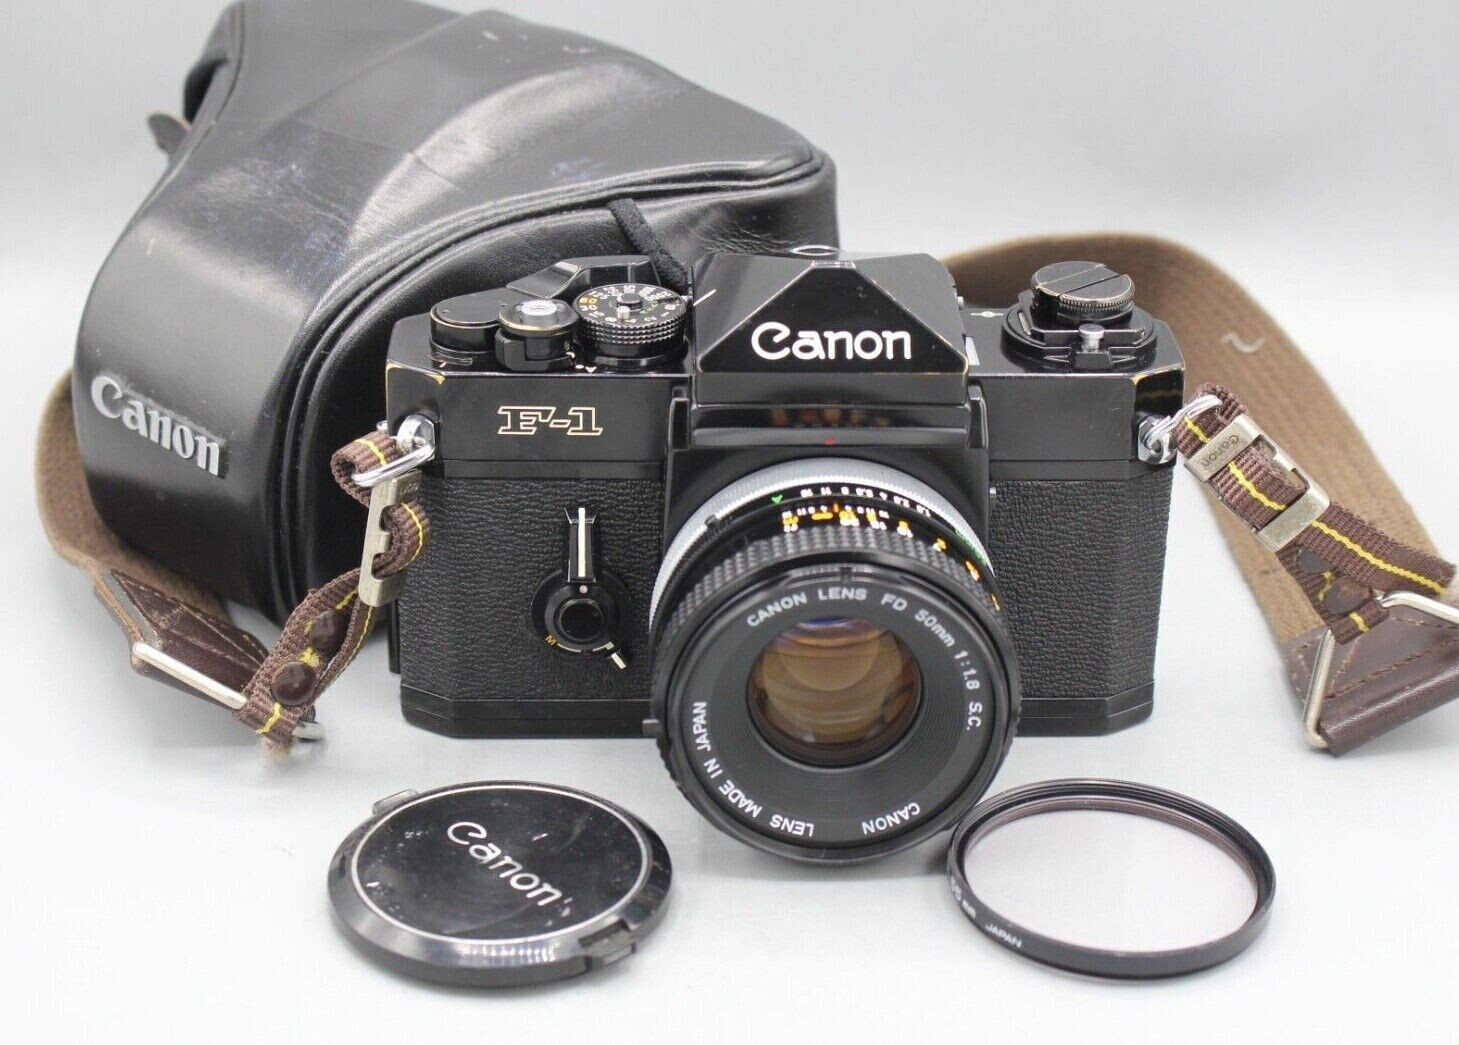 Canon F-1 35mm SLR Camera w 1.8/50 Lens Clad Tested Seals